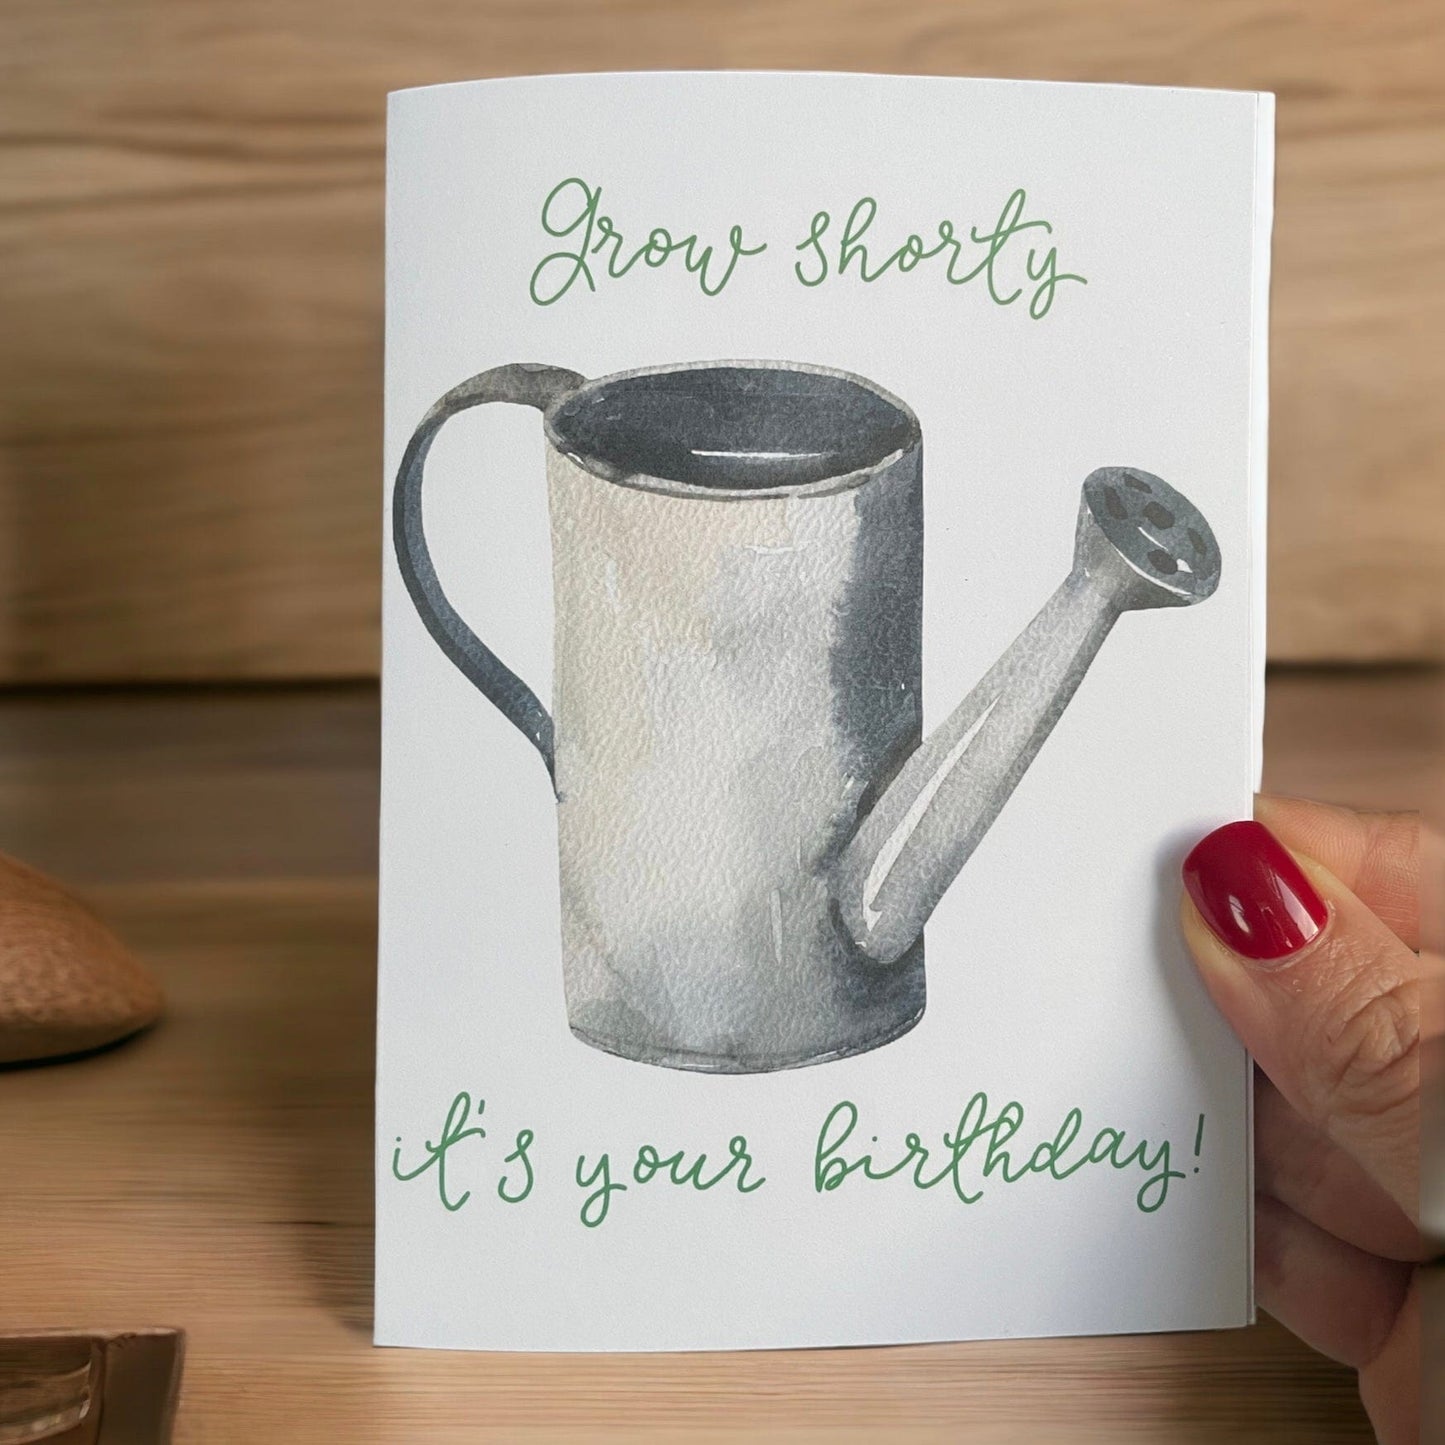 And Hope Designs Grow shorty, it’s your birthday card